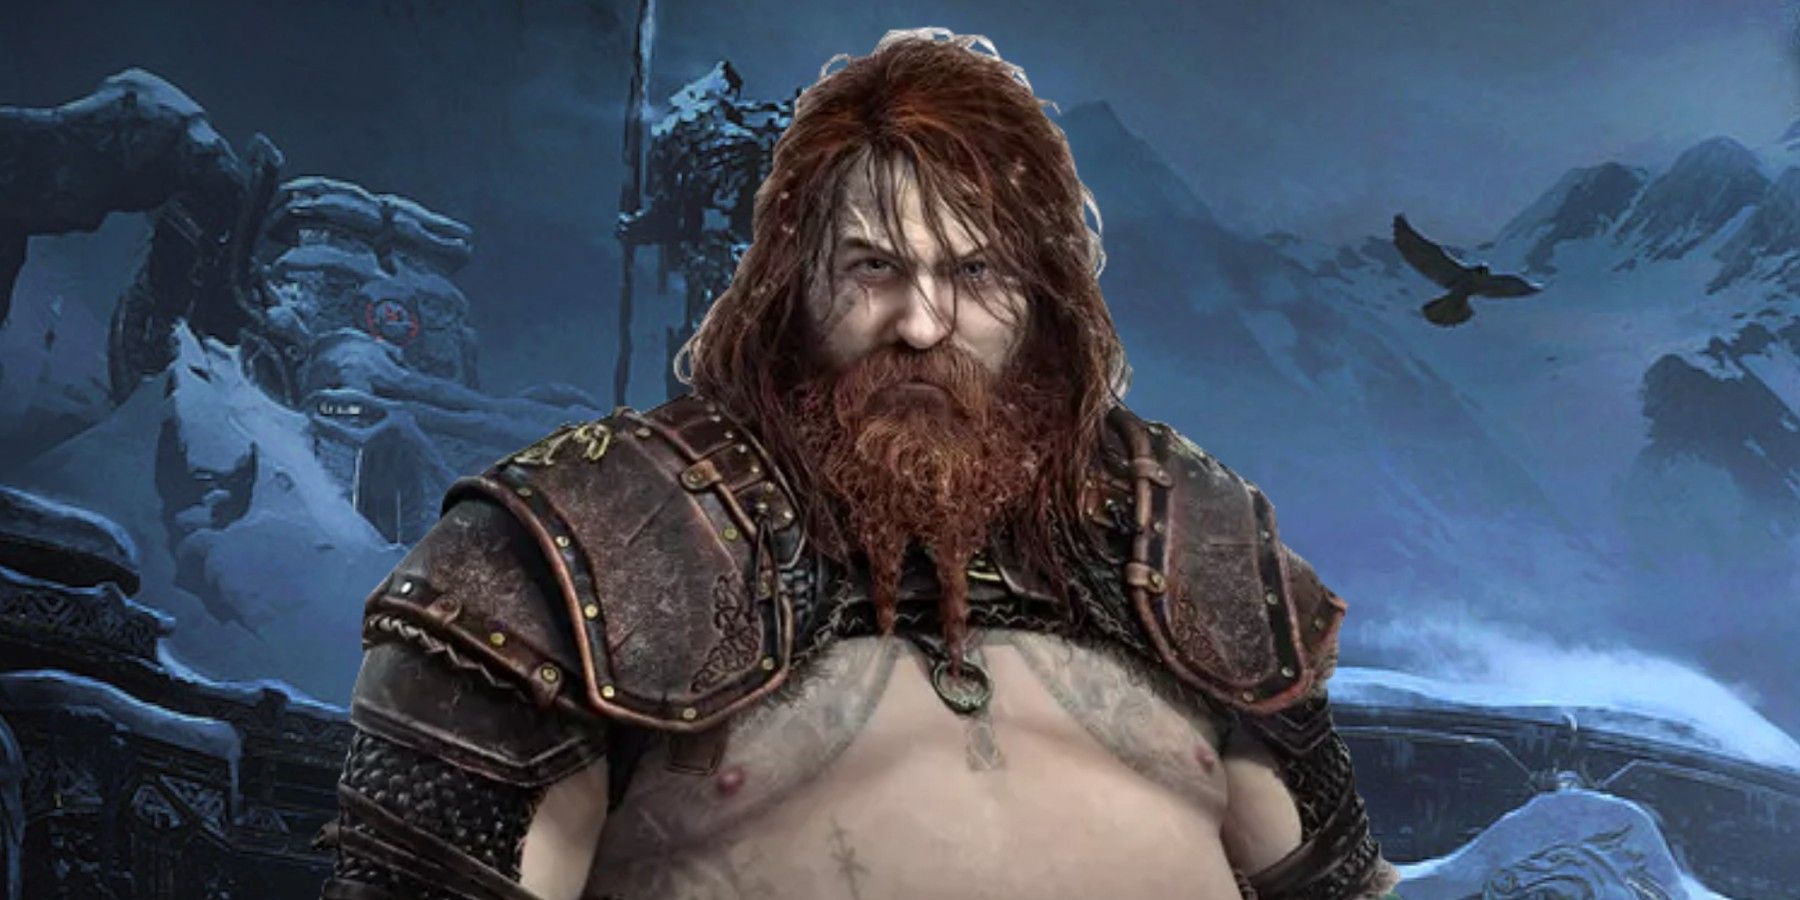 God of War Ragnarok's Thor has just wrapped up recording lines for